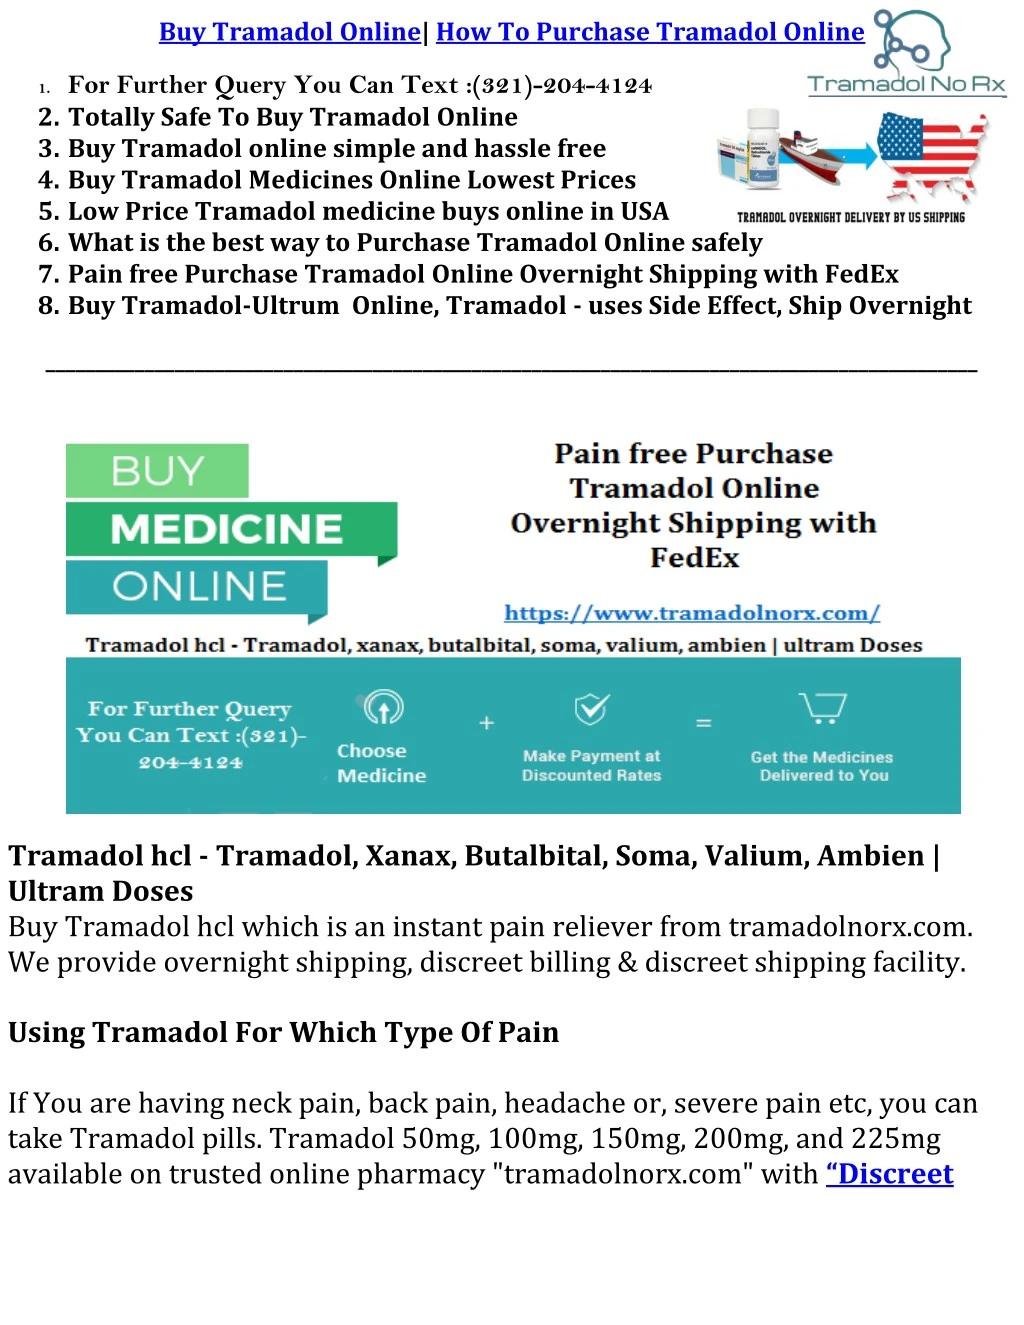 buy tramadol online how to purchase tramadol